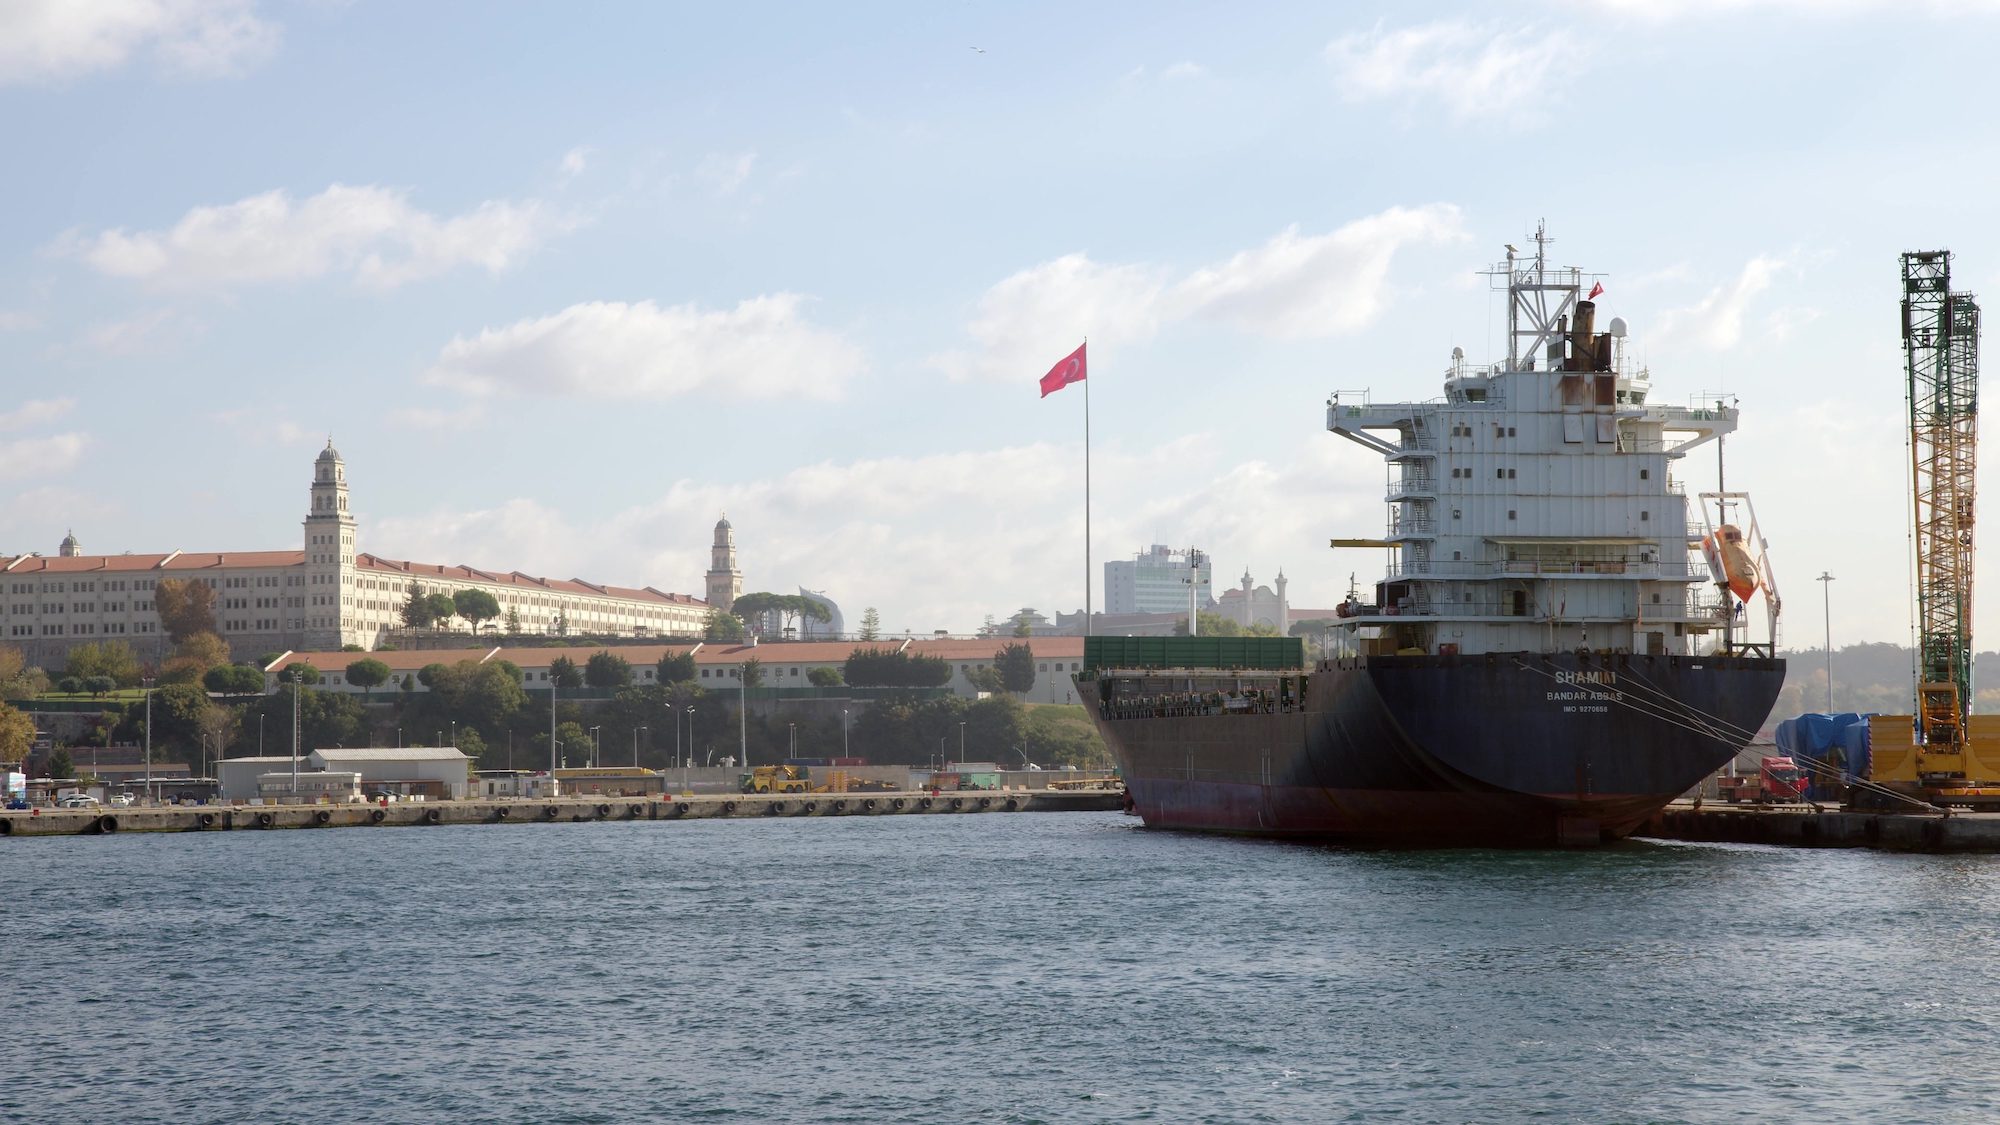 The M/V Shamim sits empty in Istanbul’s state-run port of Haydarpasa. Editorial credit: Vitaliy Andreev / Shutterstock.com